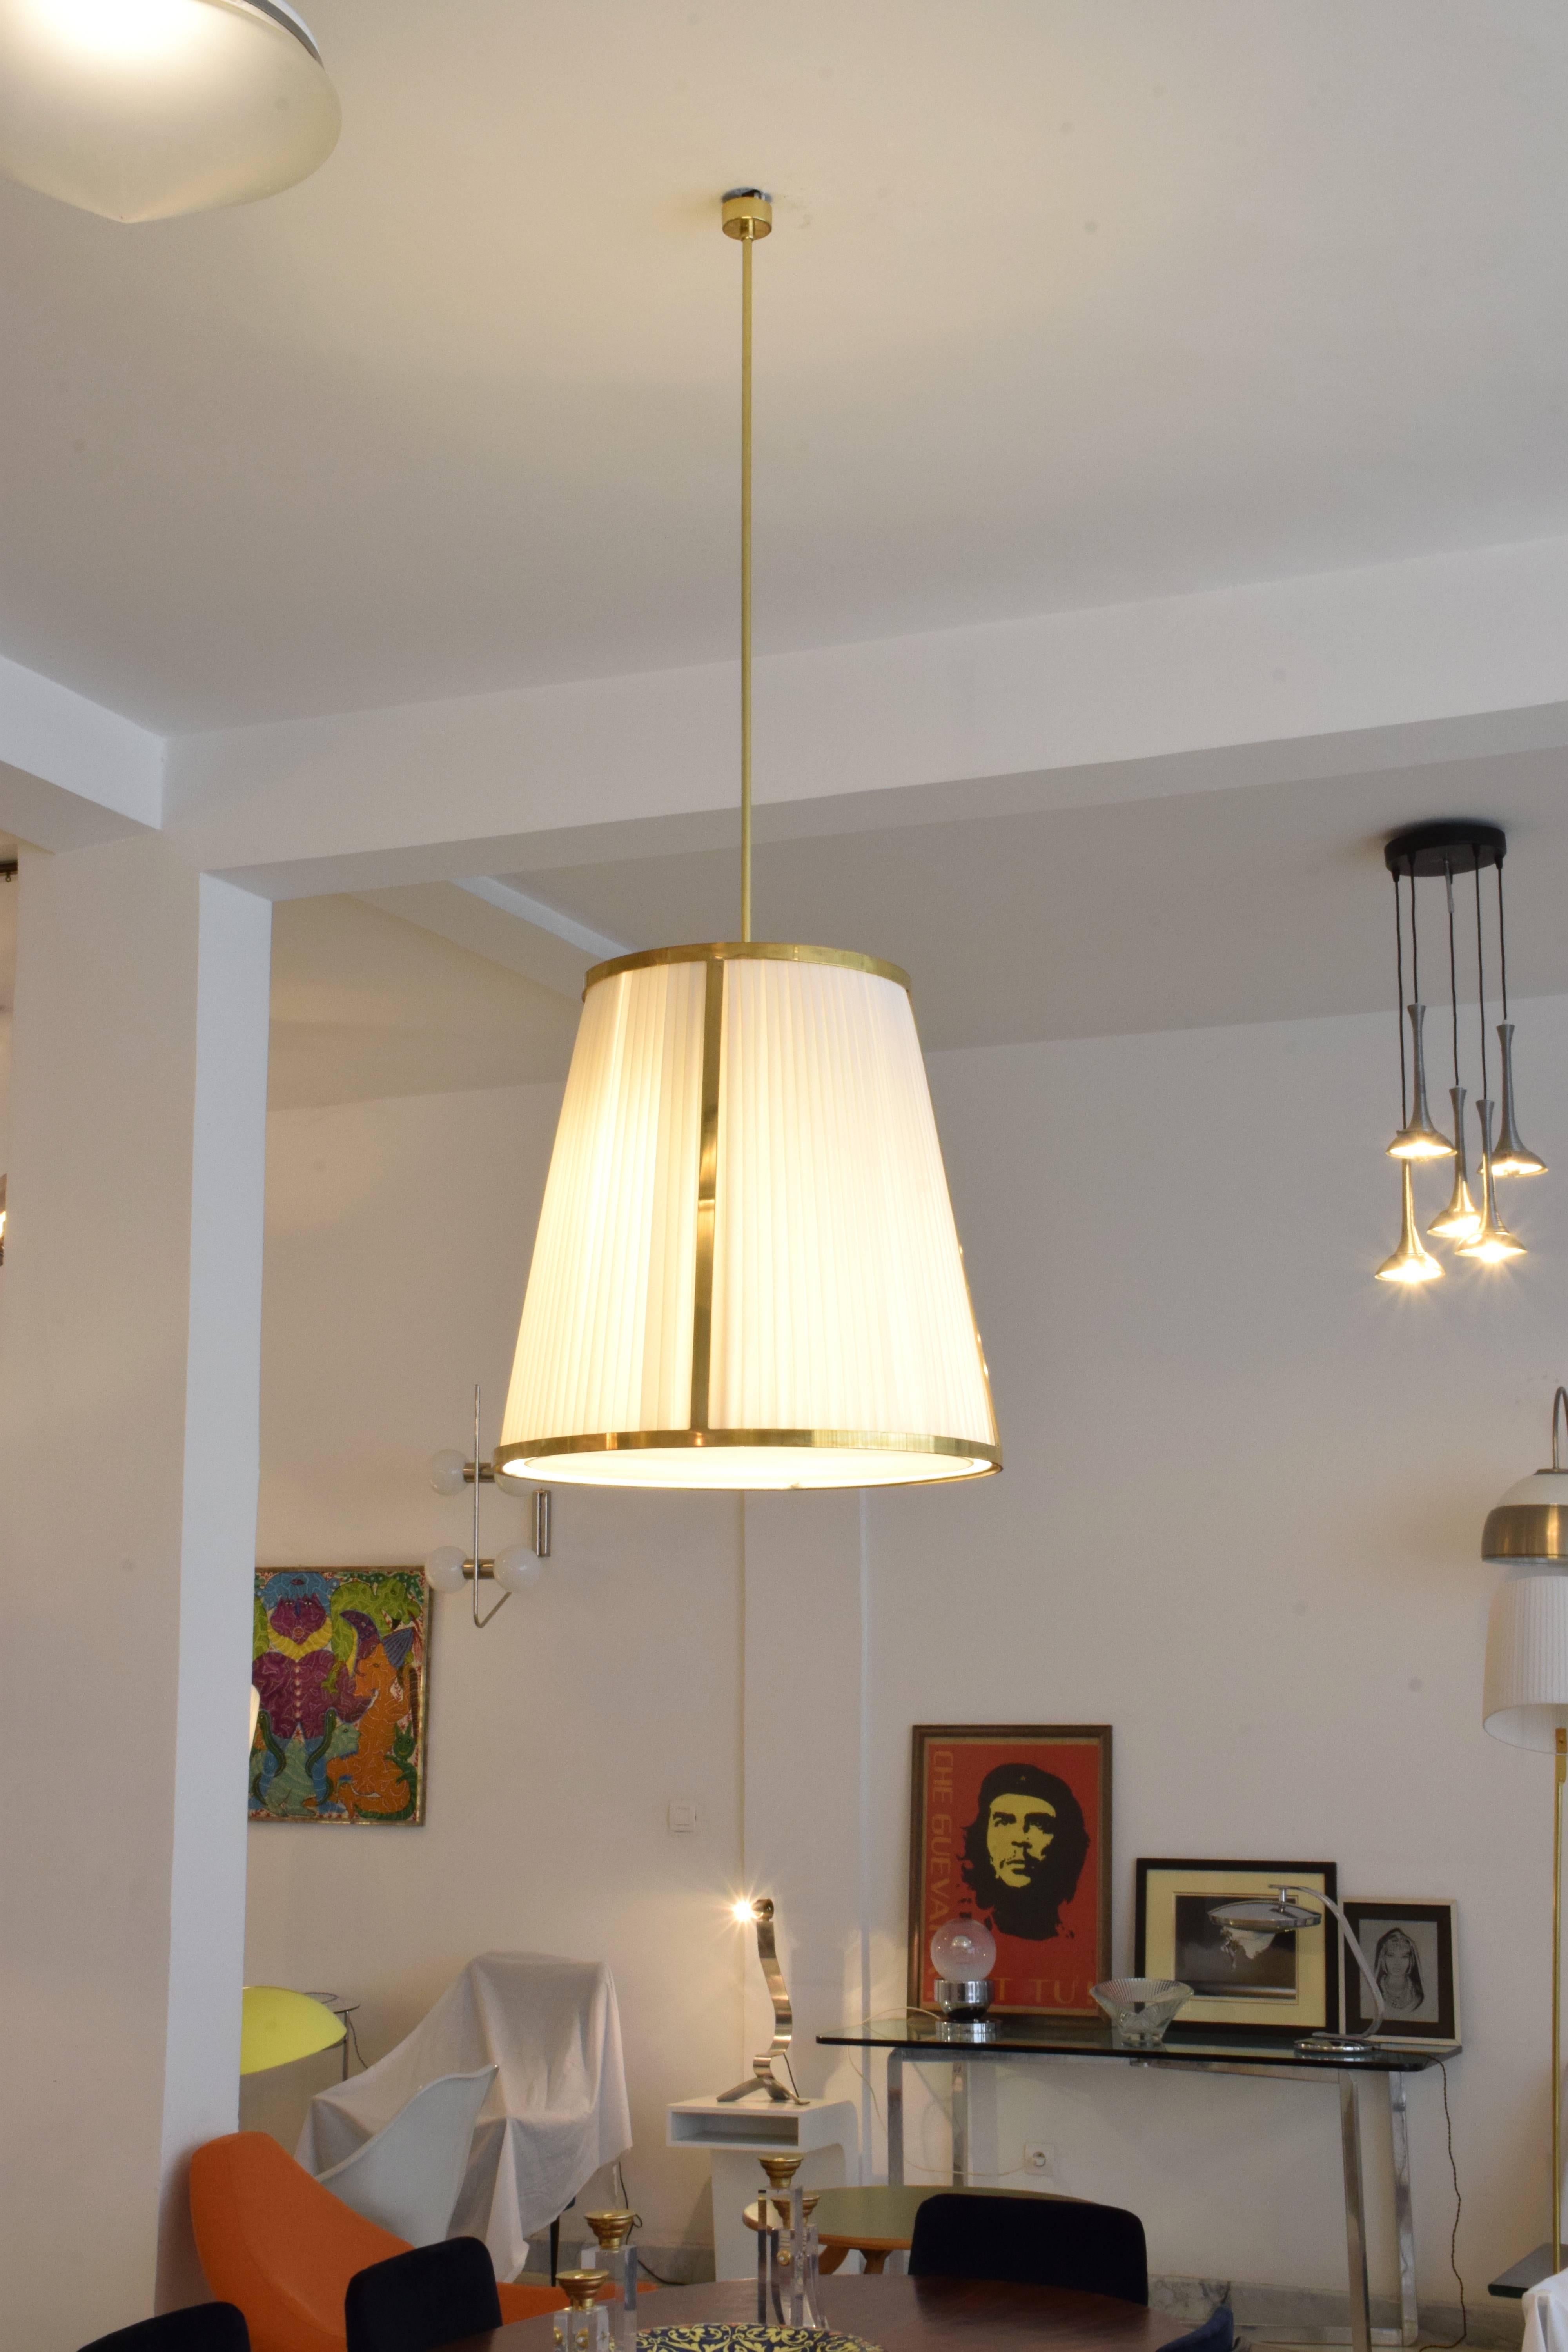  The contemporary handcrafted made-to-measure pendant light fixture features an expertly handcrafted brass structure and a hand-pleated white fabric shade. This piece creates a warm and inviting ambiance, perfect for living areas or kitchen island